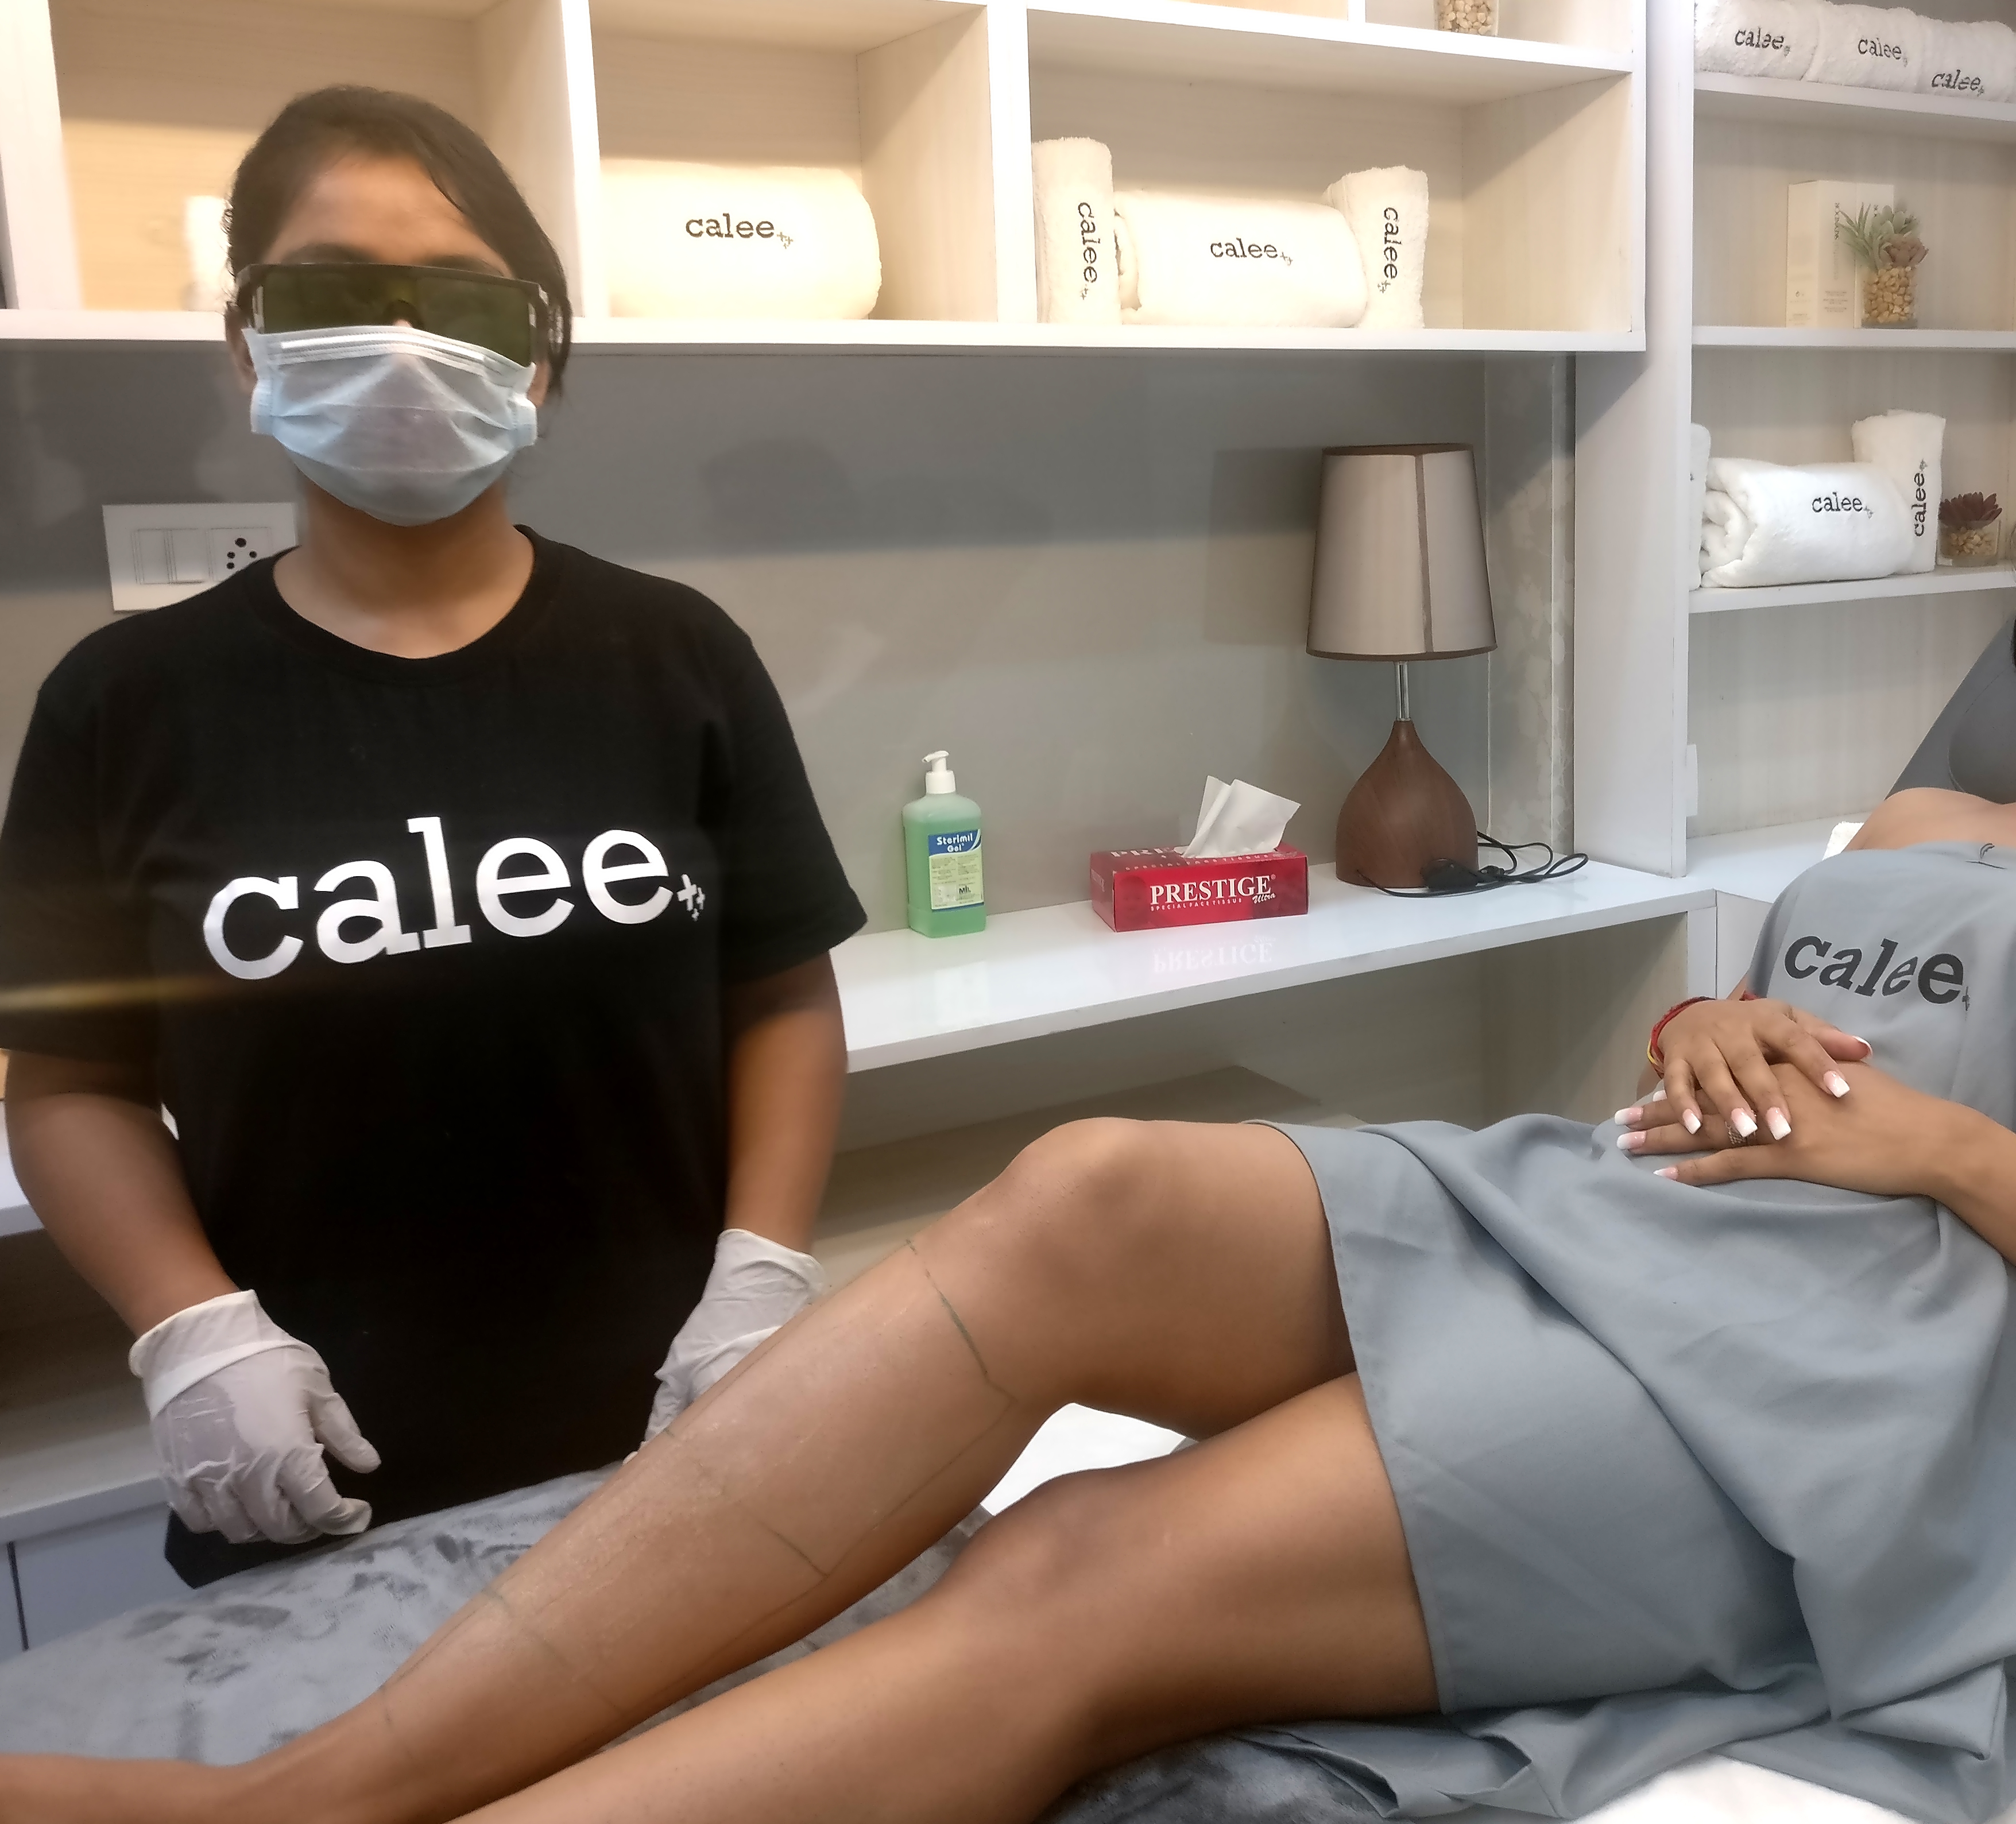 laser session at clinic calee - Know 6 Reasons to Opt for Laser Hair Reduction at Clinic Calee Sector 18 Noida